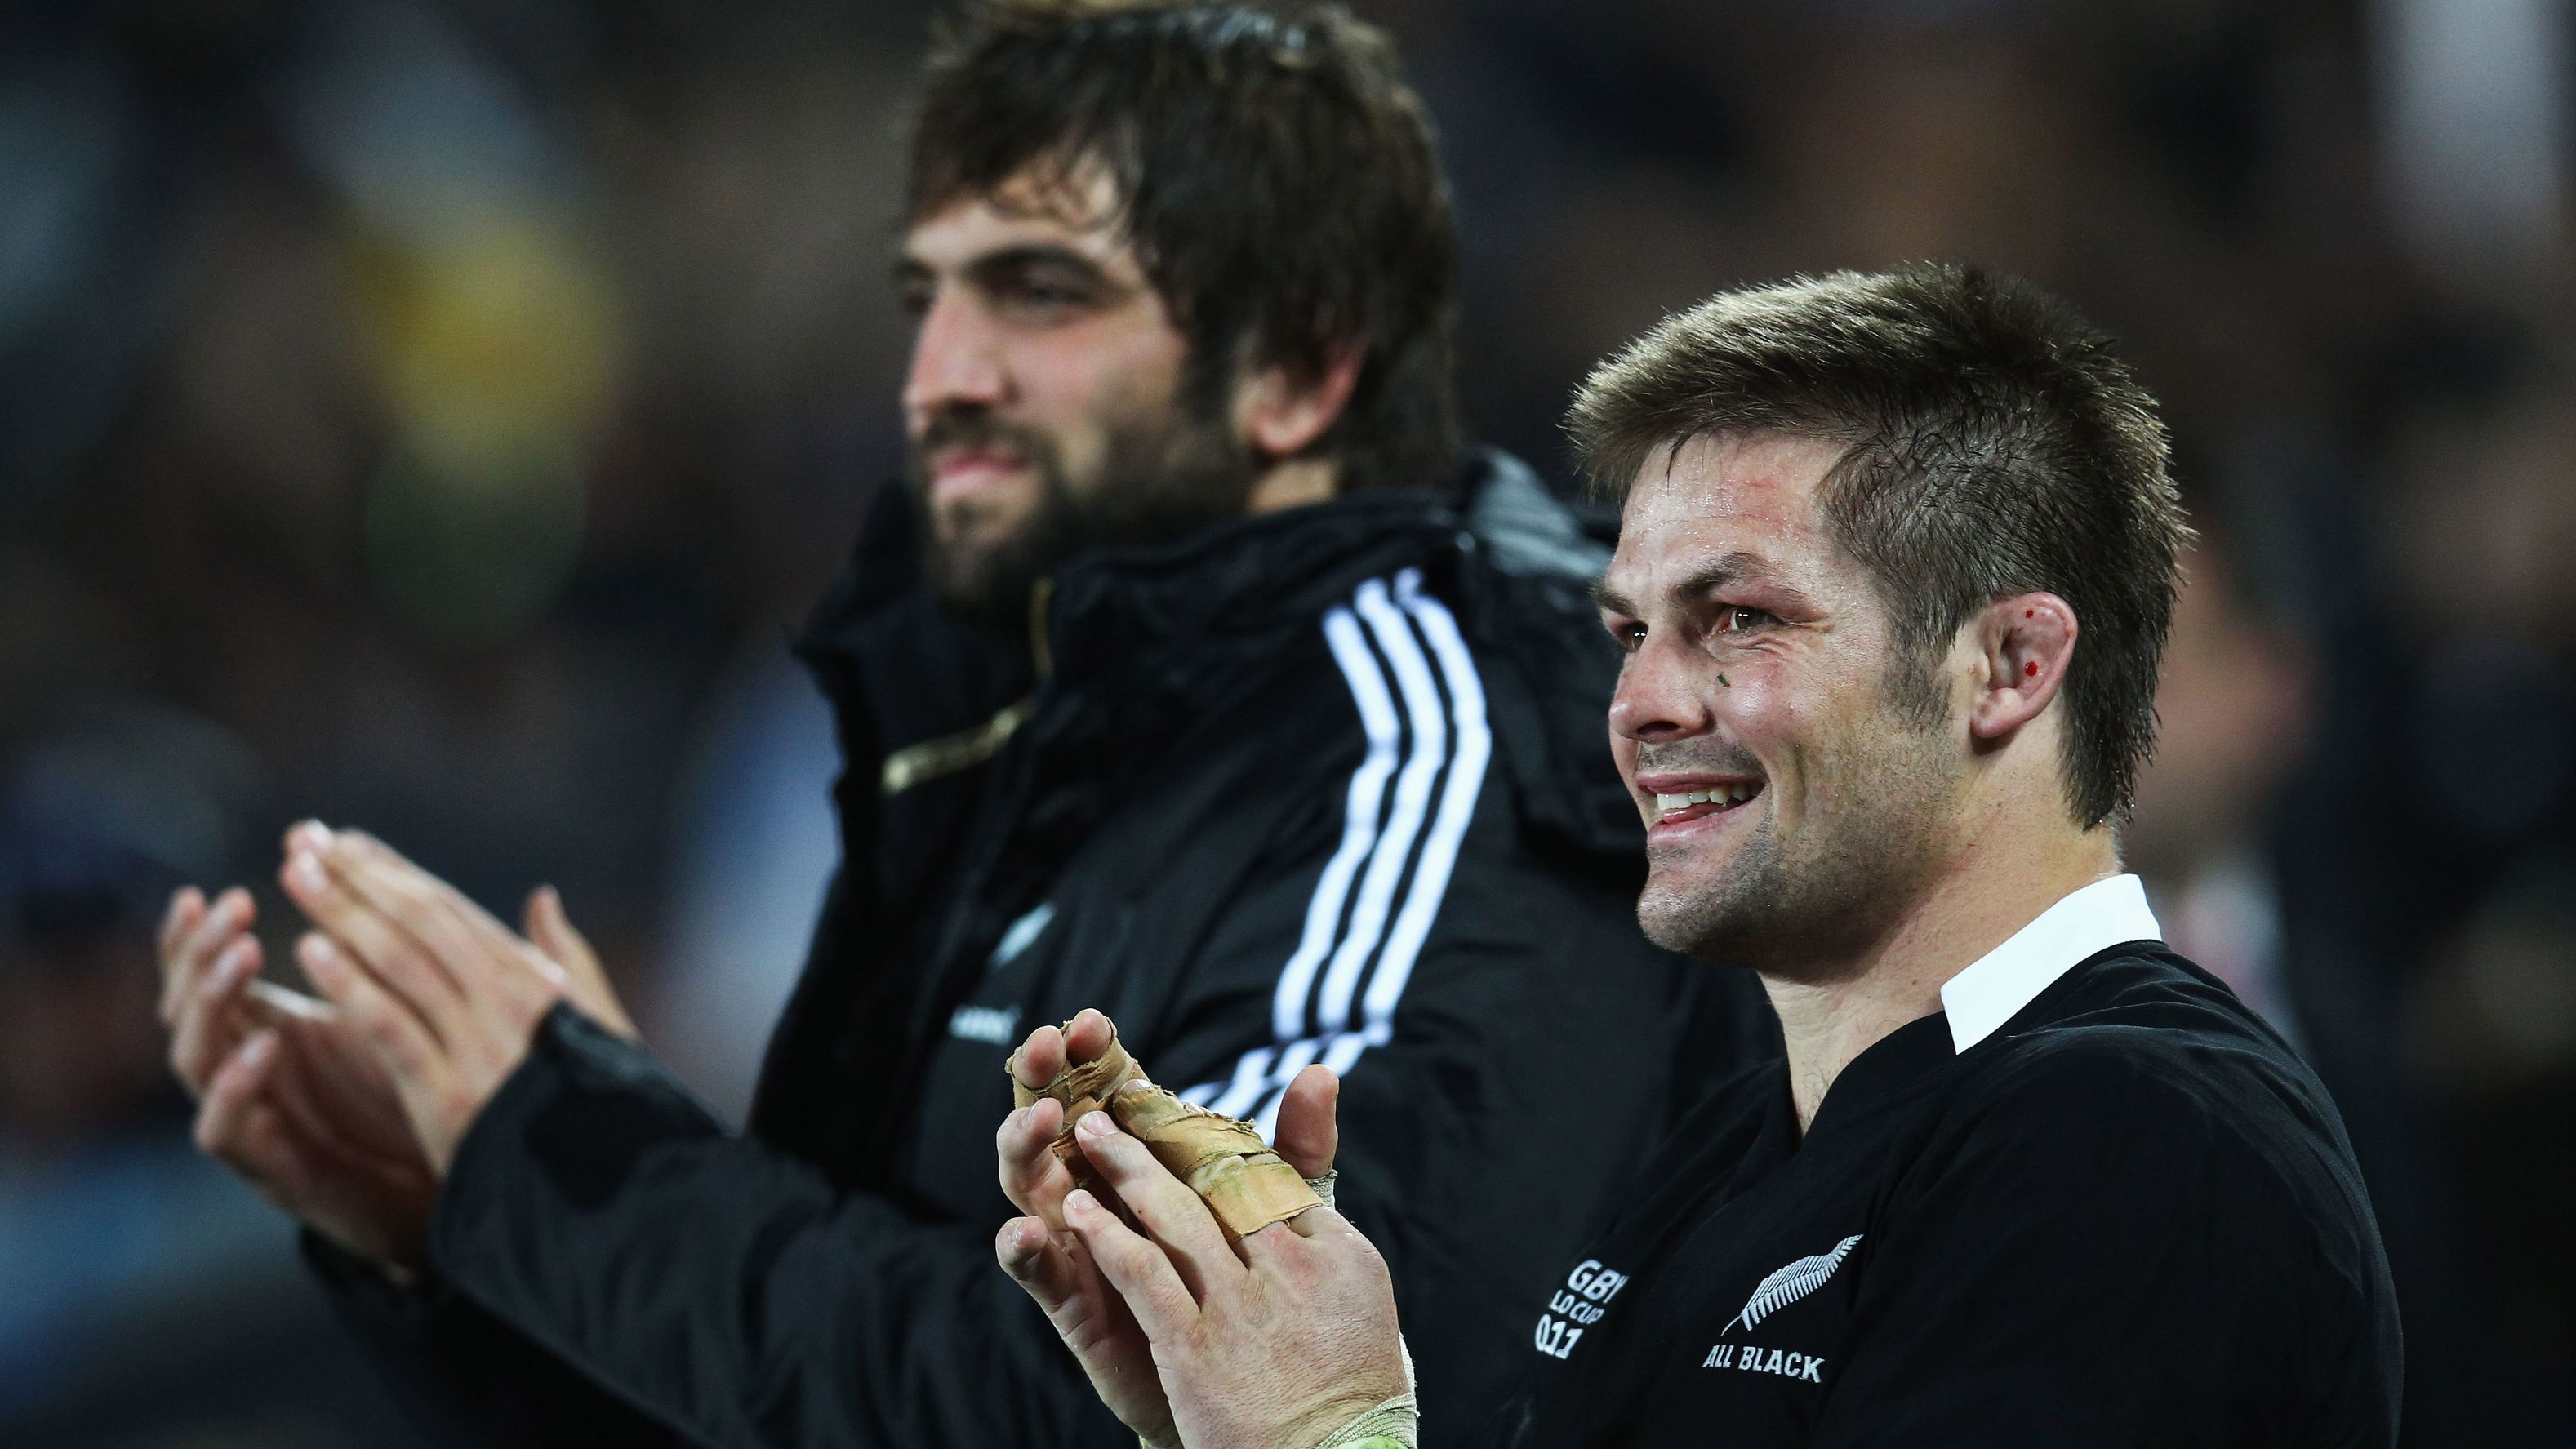 Richie McCaw and Sam Whitelock at the 2011 Rugby World Cup.